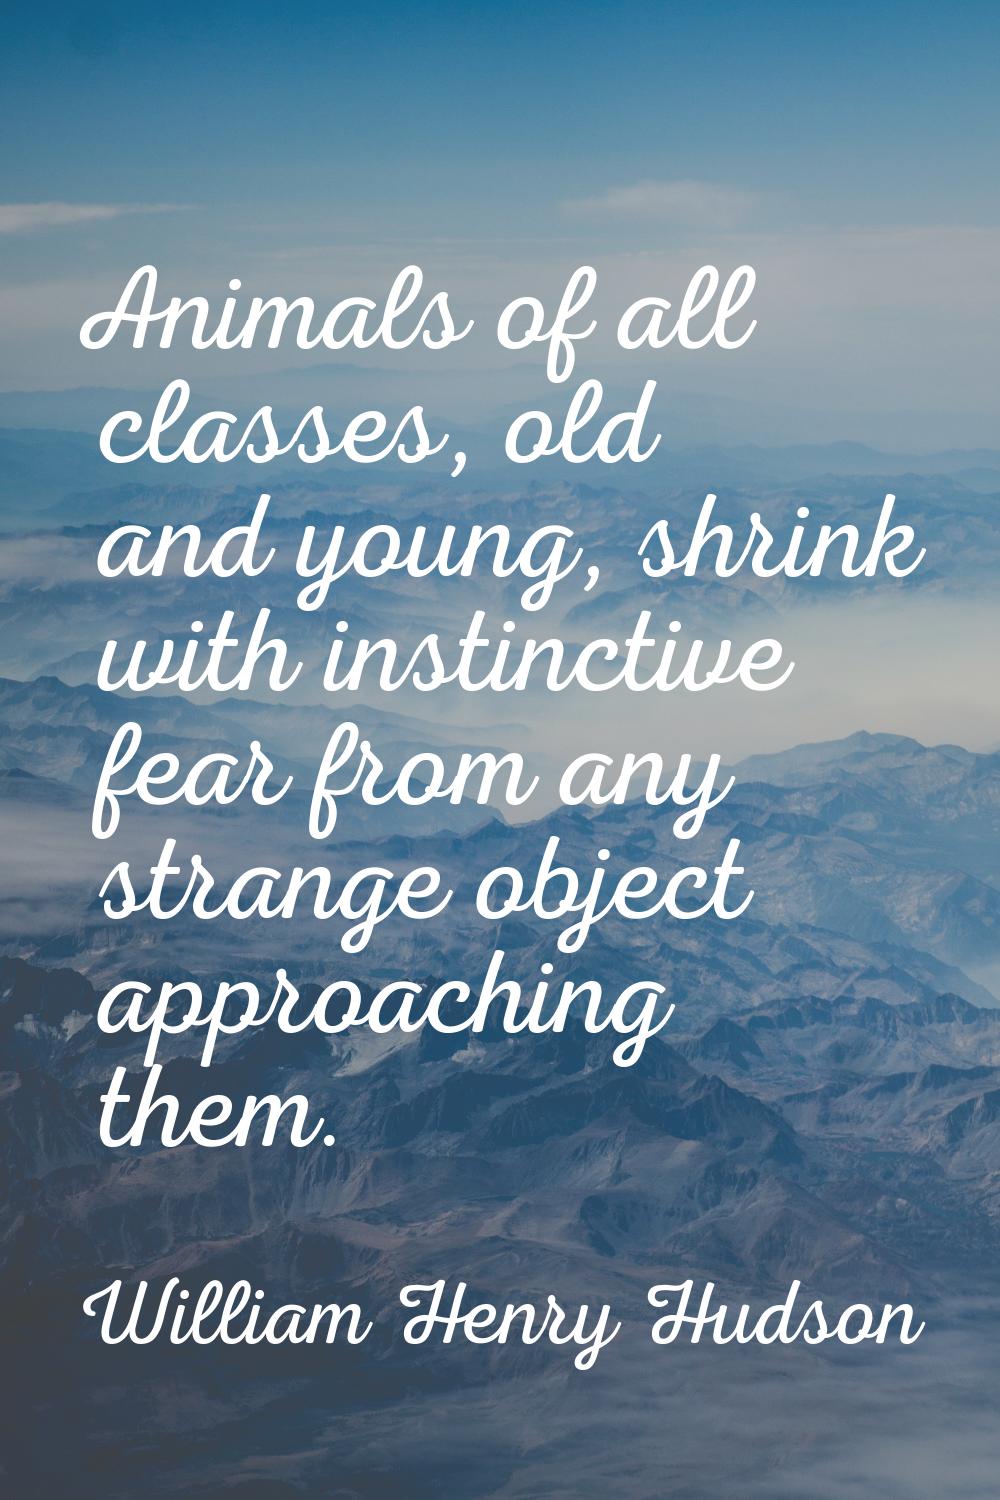 Animals of all classes, old and young, shrink with instinctive fear from any strange object approac